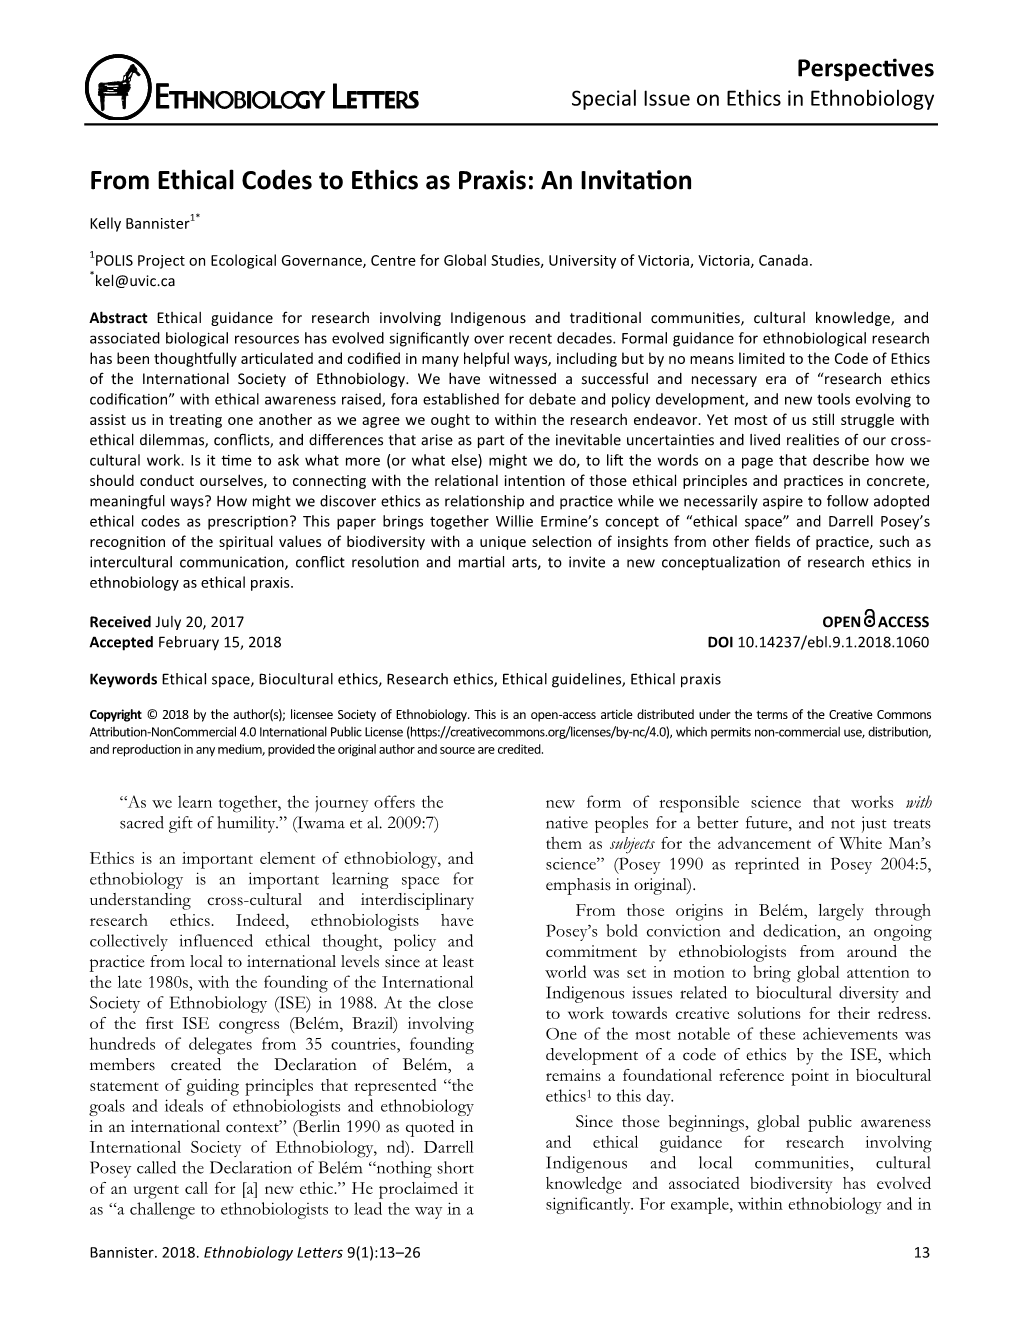 From Ethical Codes to Ethics As Praxis: an Invitation